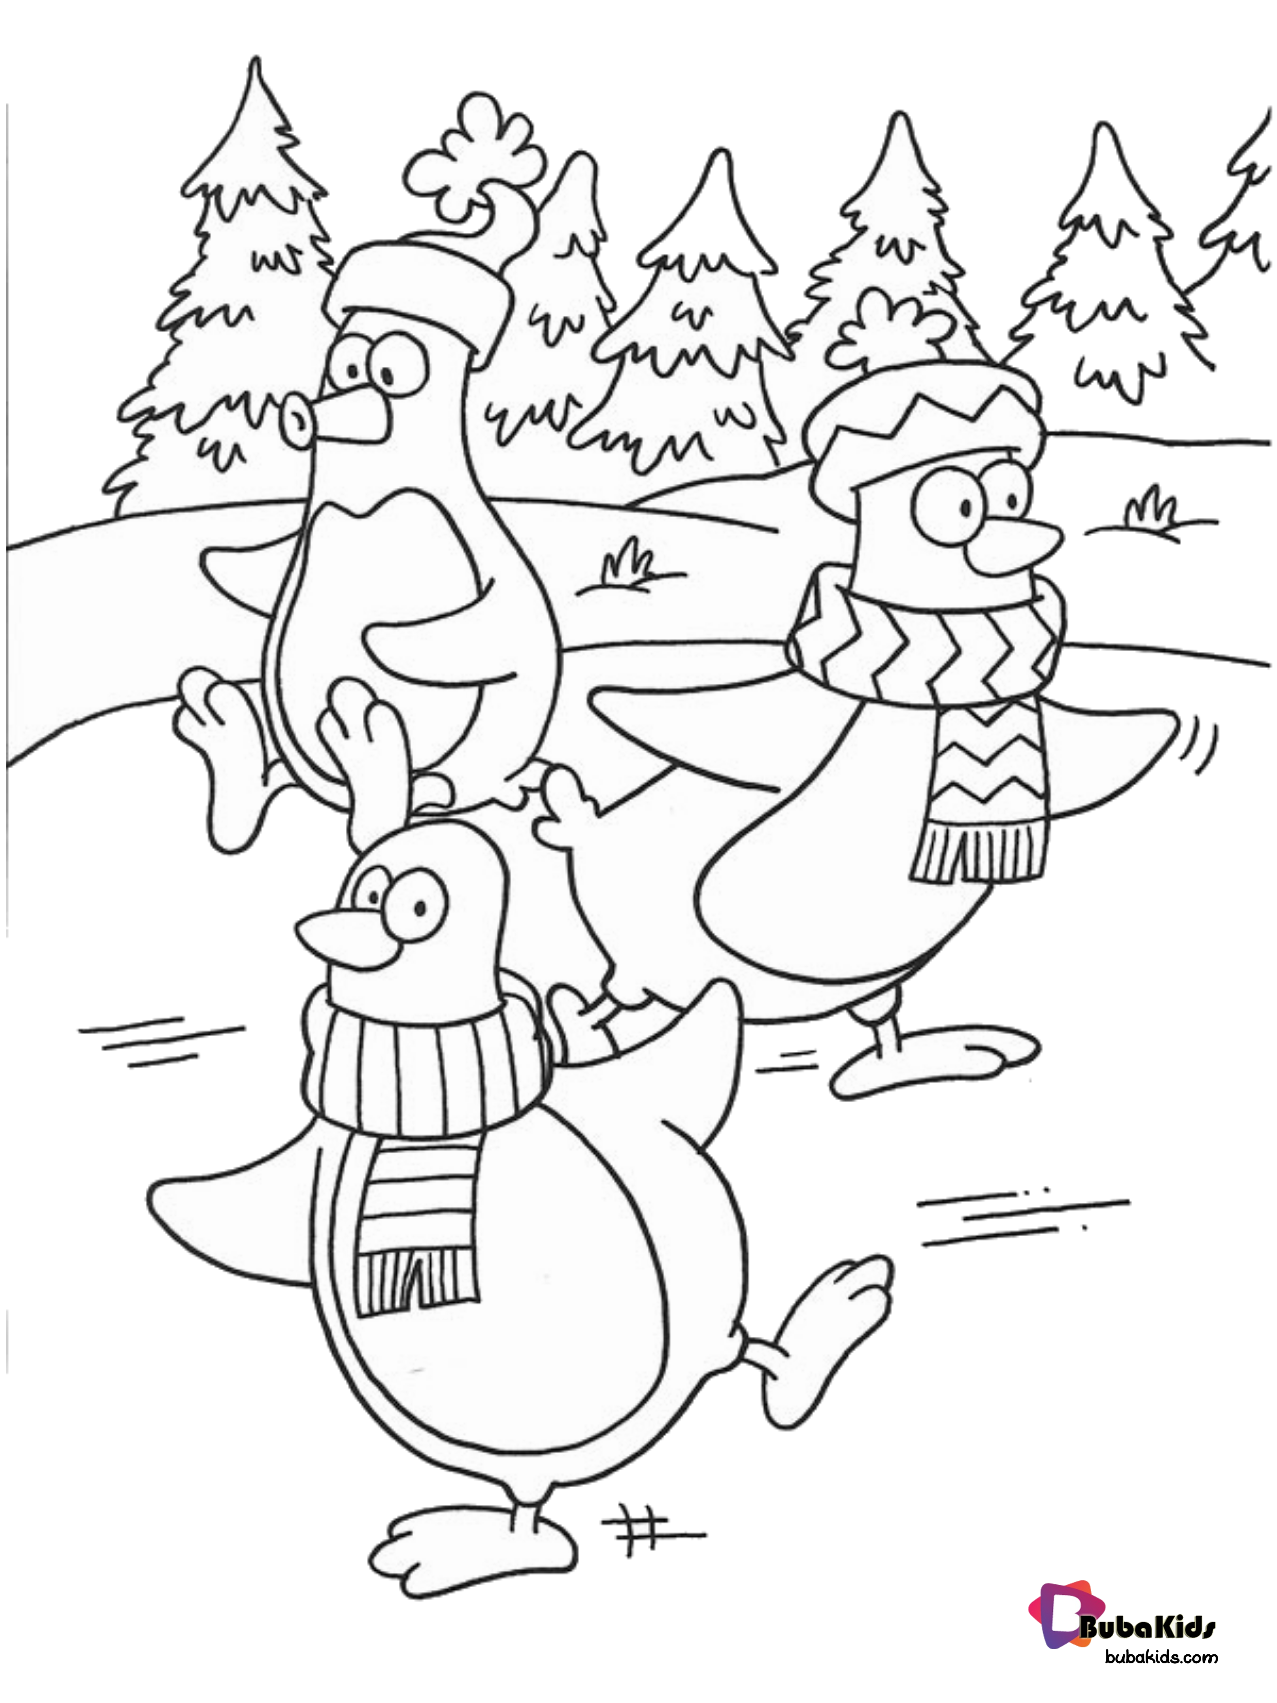 Winter coloring page free download and printable picture. Wallpaper